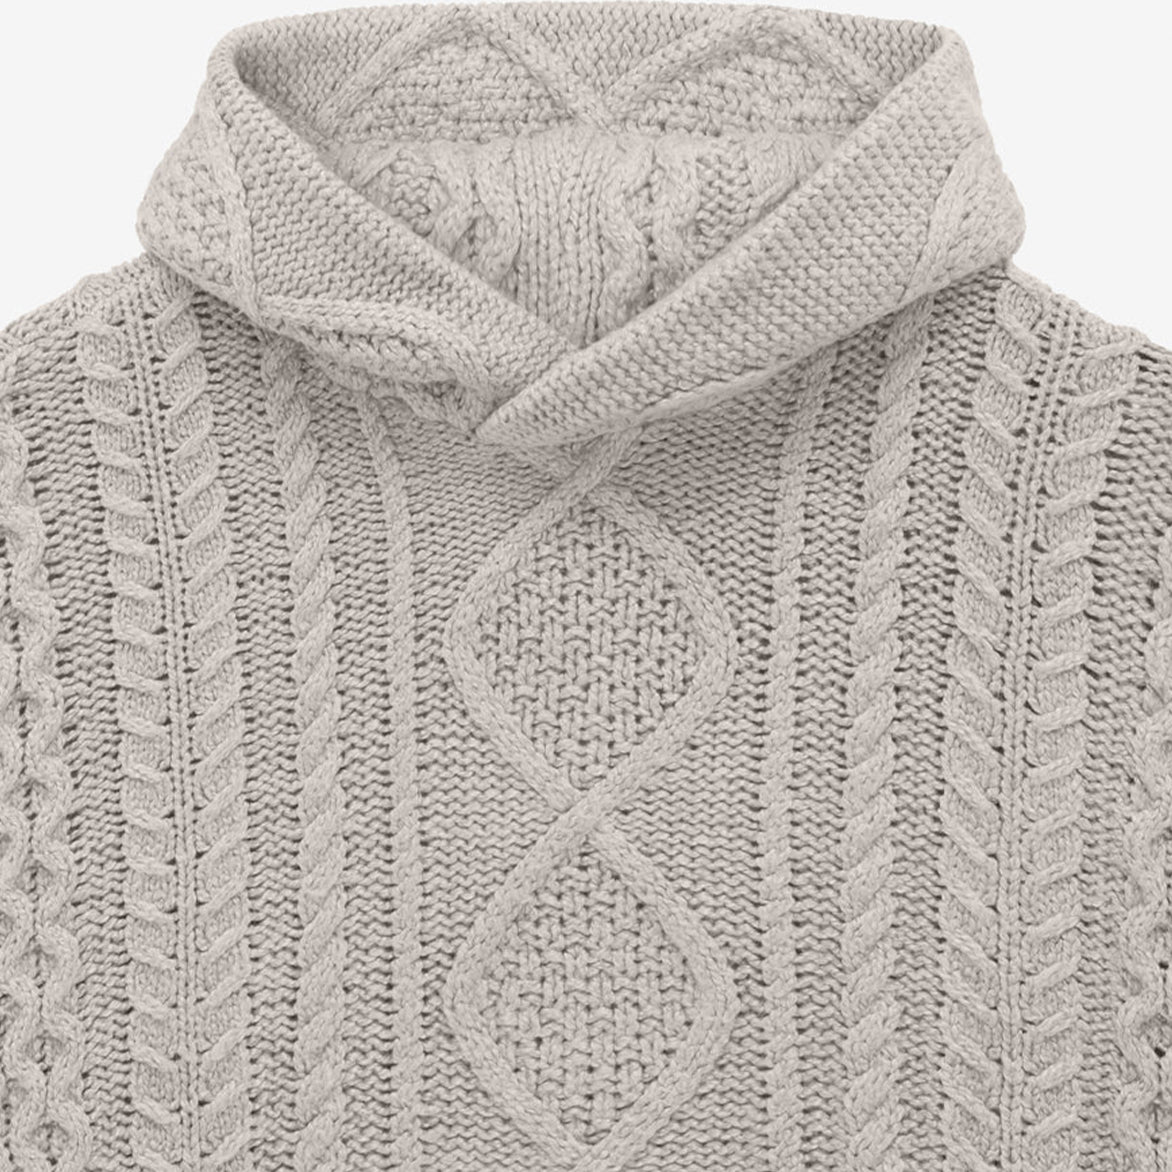 ESSENTIALS CABLE KNIT HOODIE - SILVER CLOUD